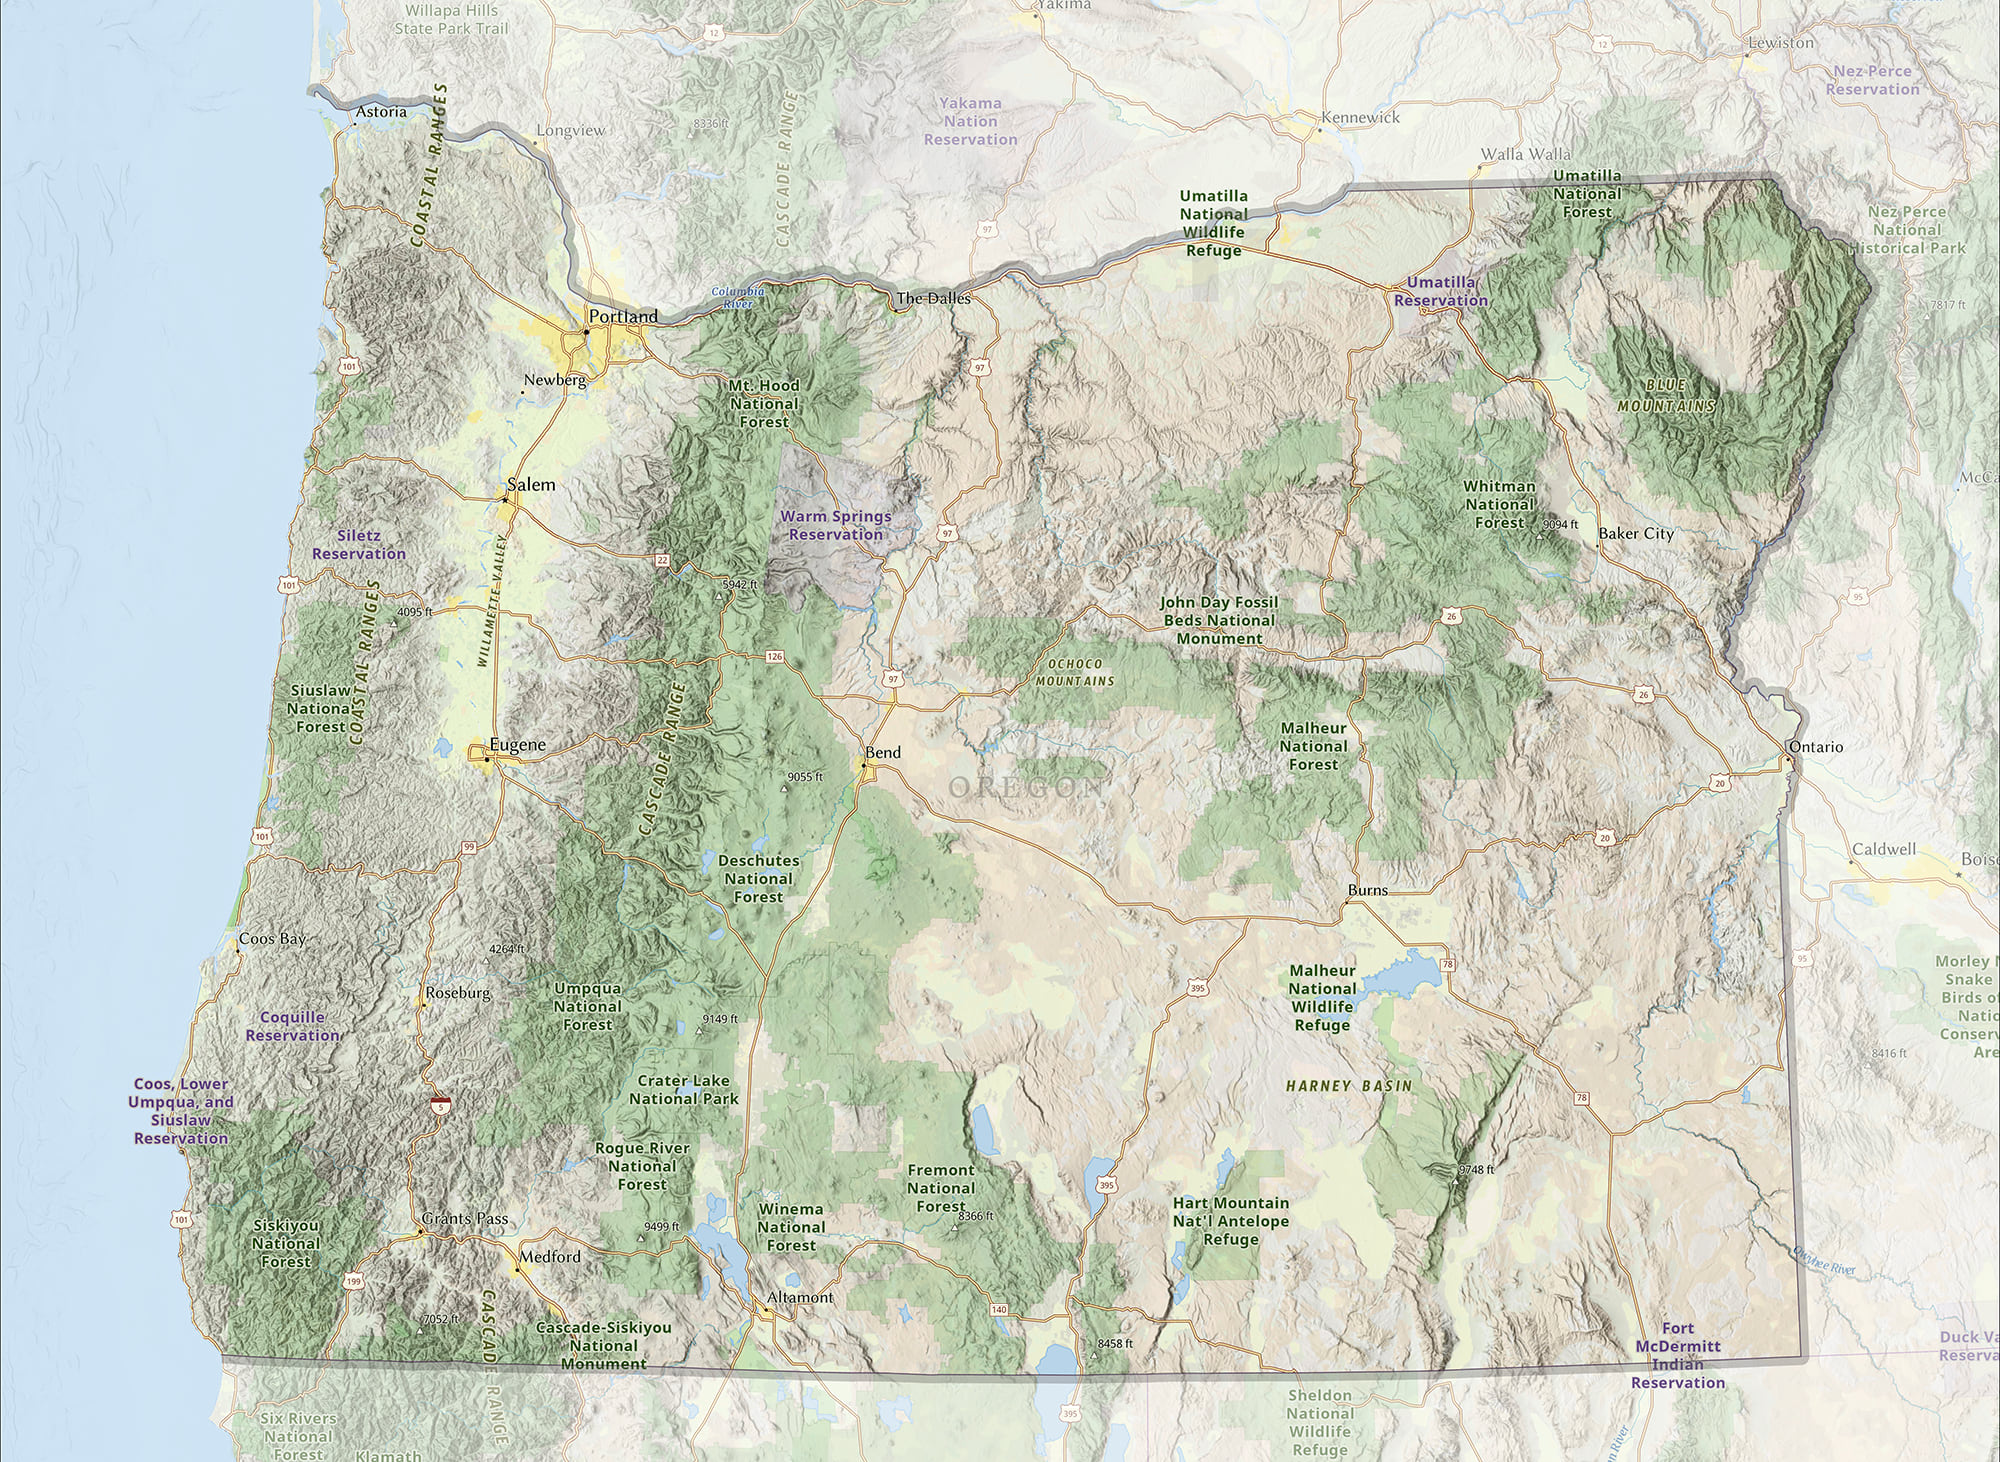 A topographic map of Oregon, built from an adjusted version of the National Geographic Style basemap